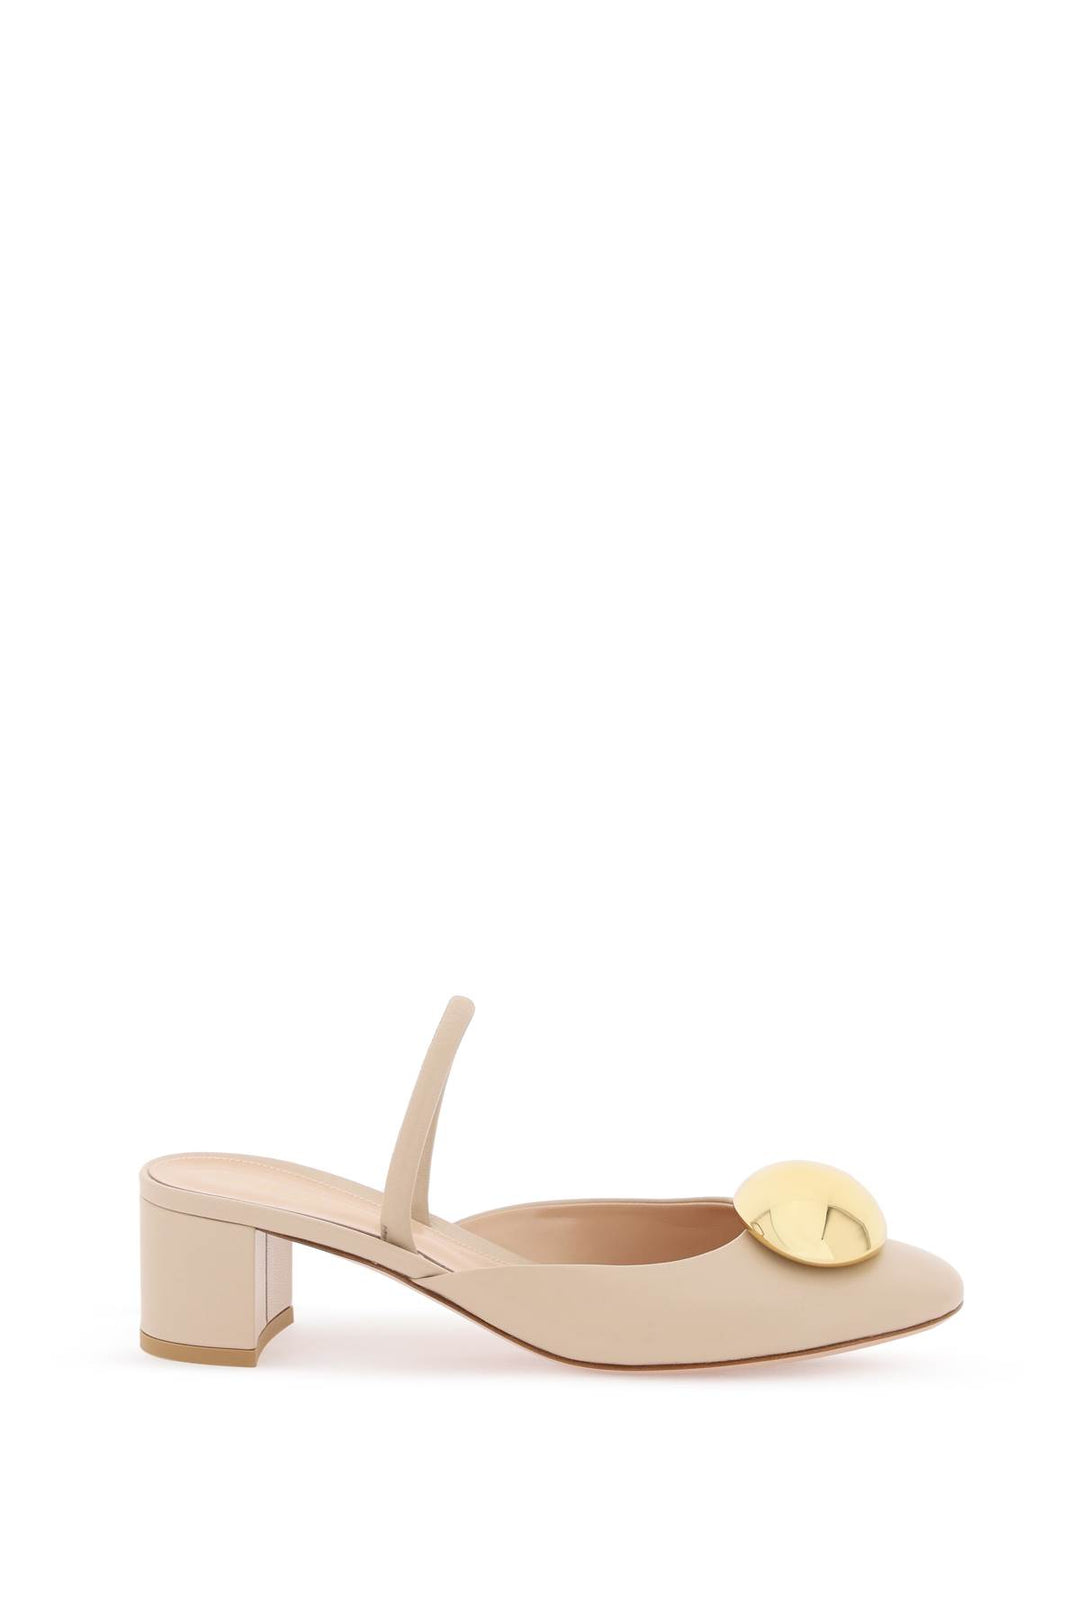 Gianvito Rossi Slingback Décollet   Neutral